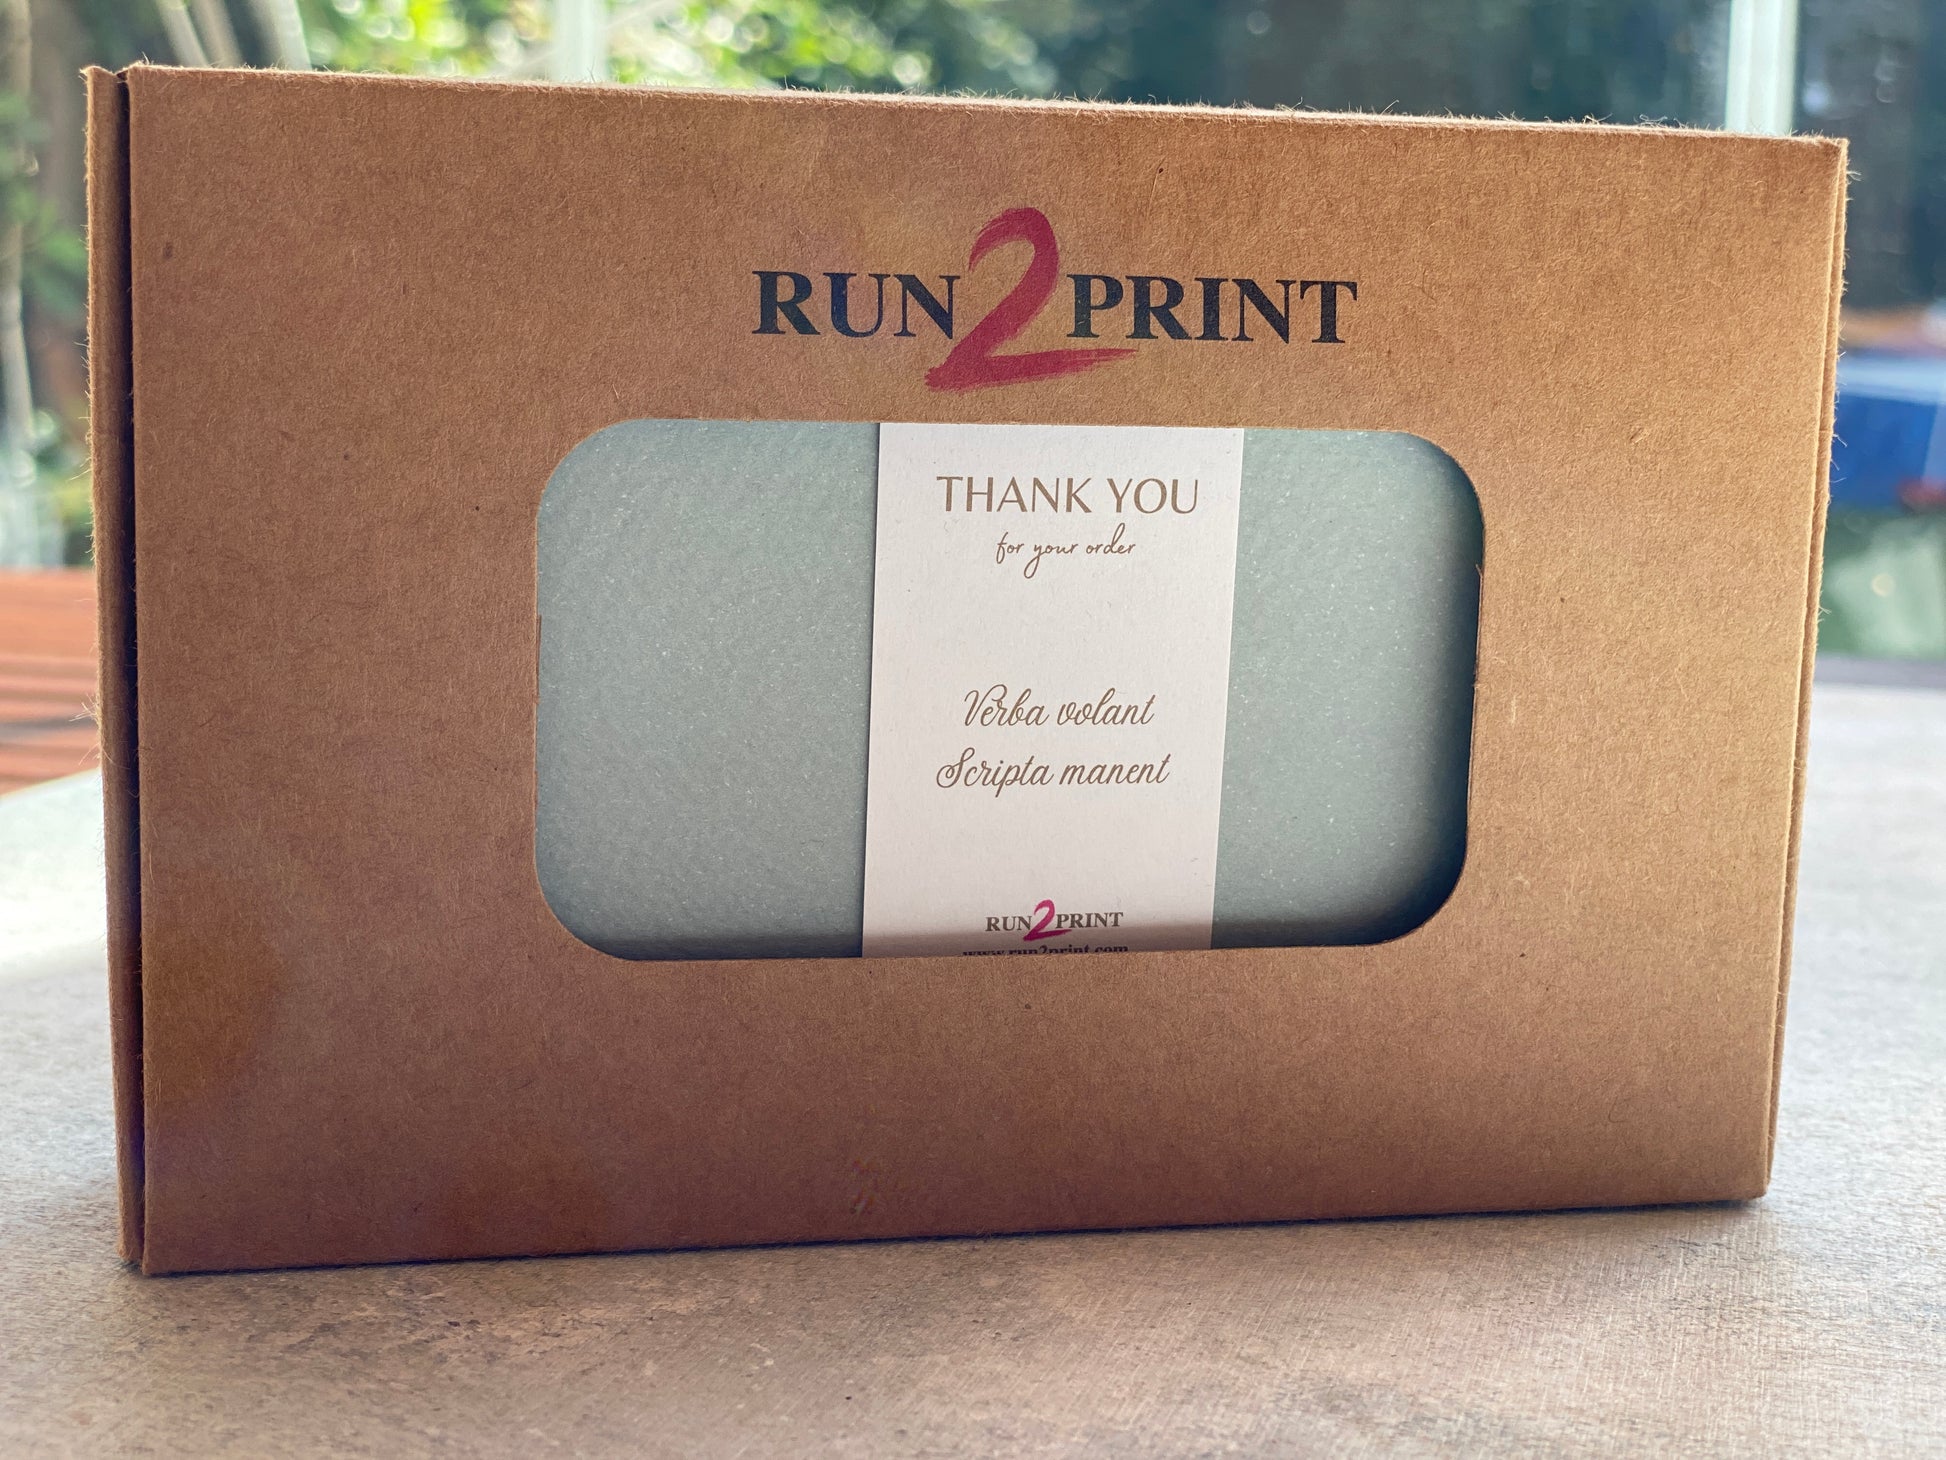 Run2Print (36 Pack) Thank You Cards With Envelopes & Stickers - Elegant  Dusty Blue Emboss Gold Foil …See more Run2Print (36 Pack) Thank You Cards  With